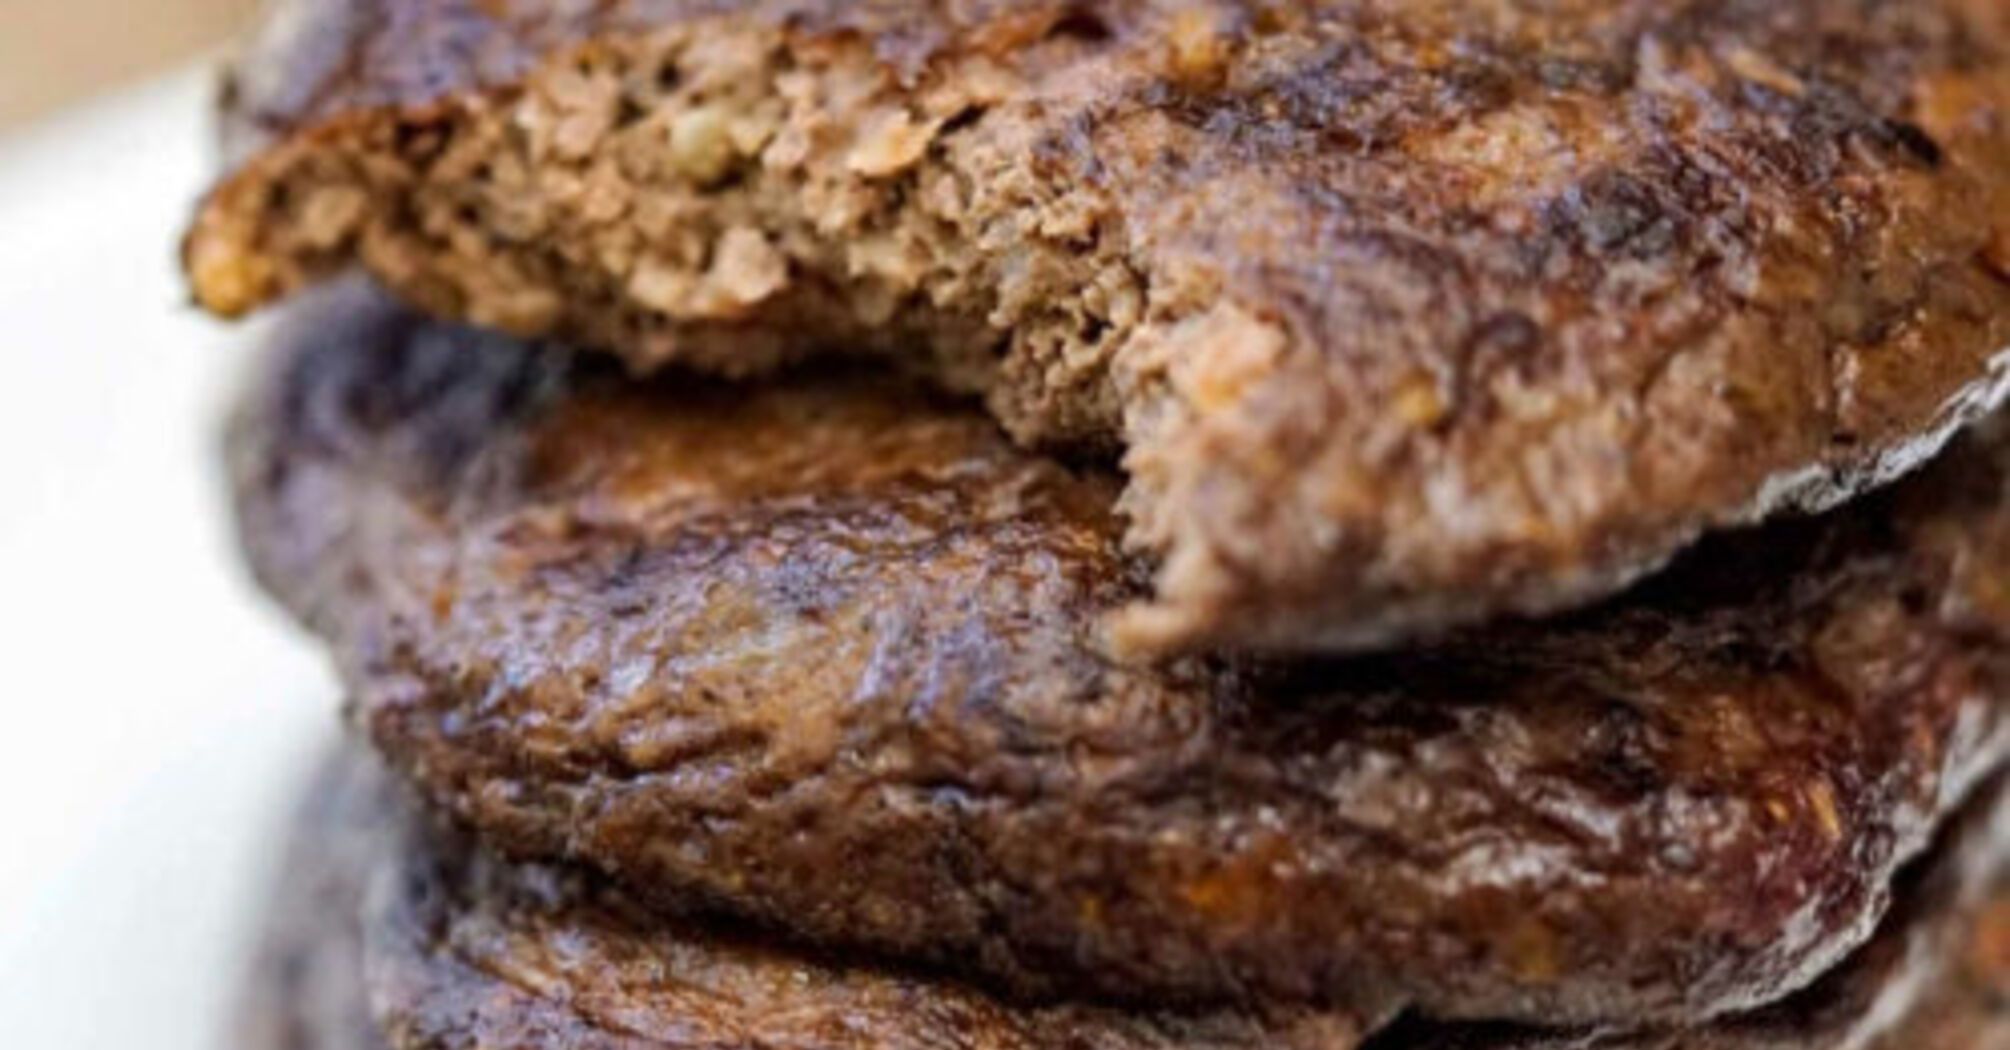 Liver cutlets with oatmeal